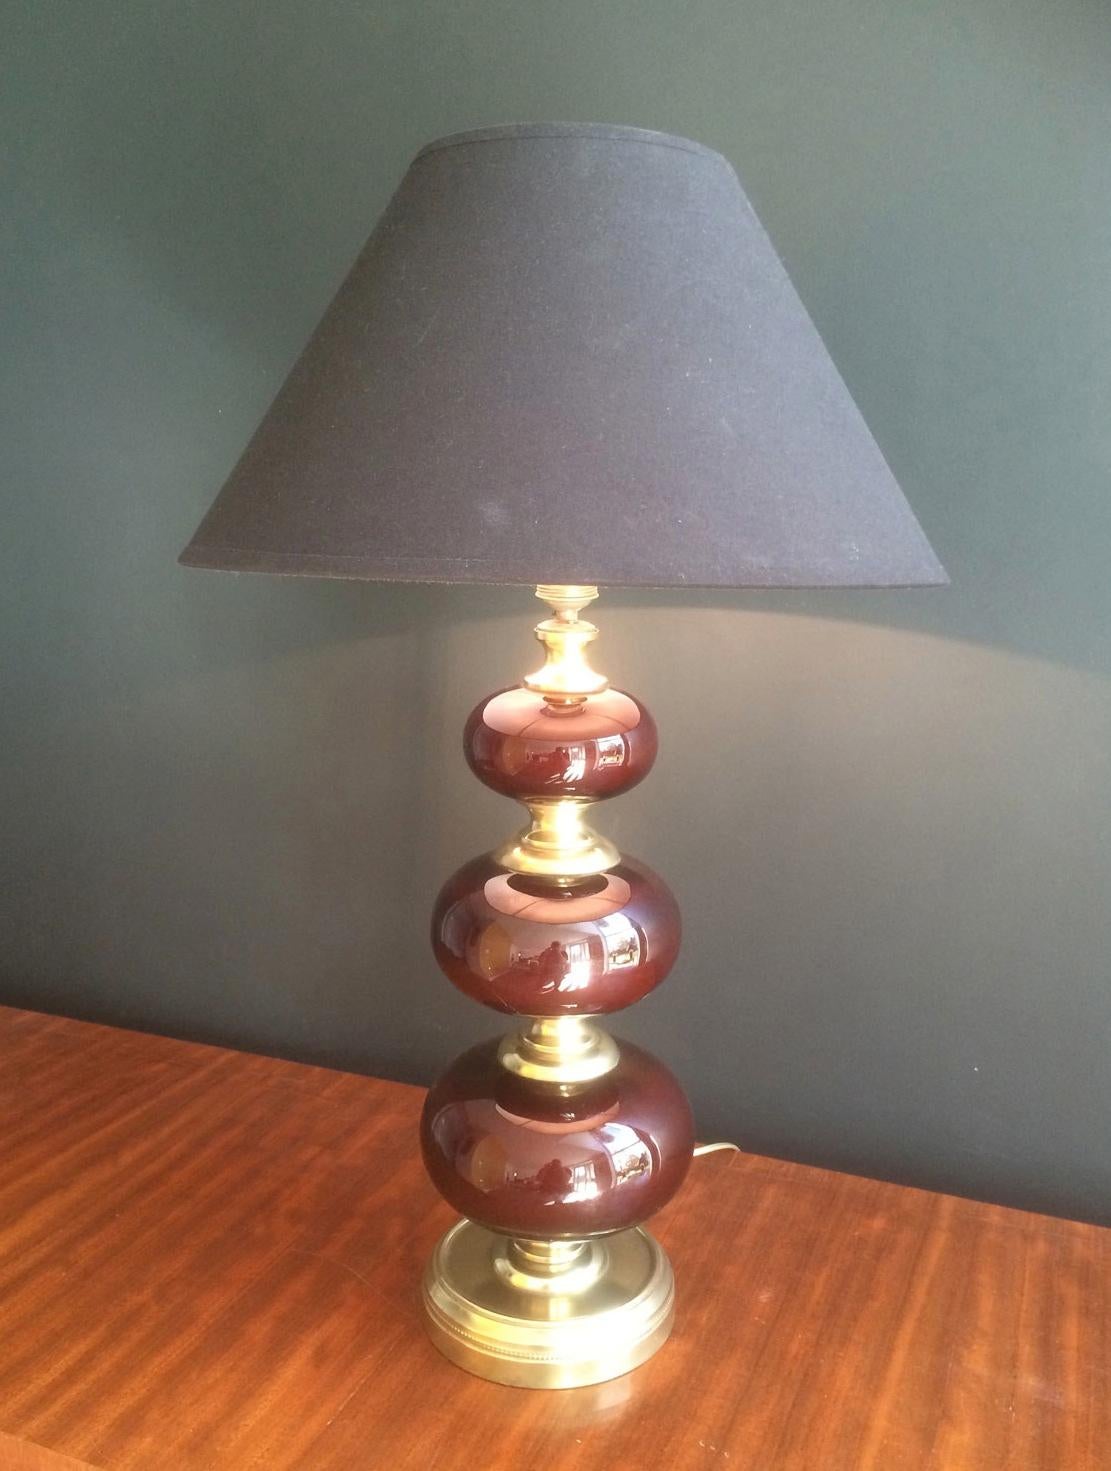 This beautiful table lamp is made of 3 nice red glass balls and brass elements. This is a nice work by a French designer, circa 1960.